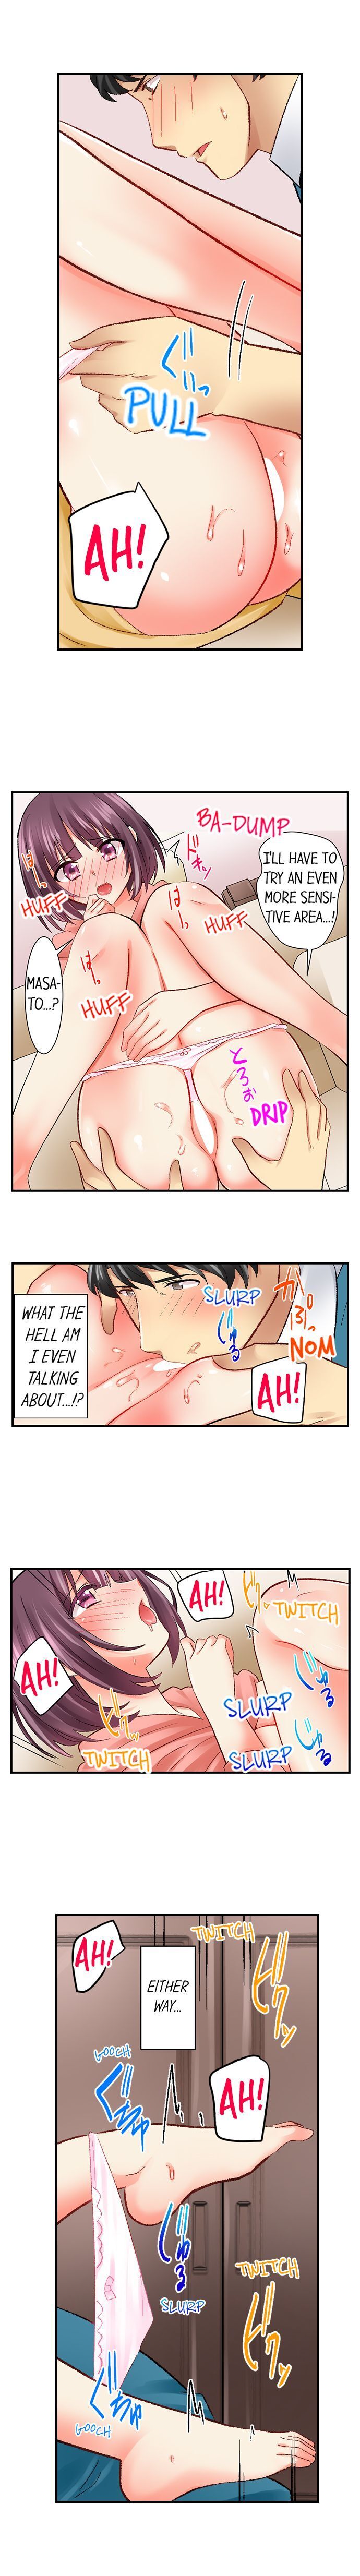 Our Kinky Newlywed Life - Chapter 38 Page 6